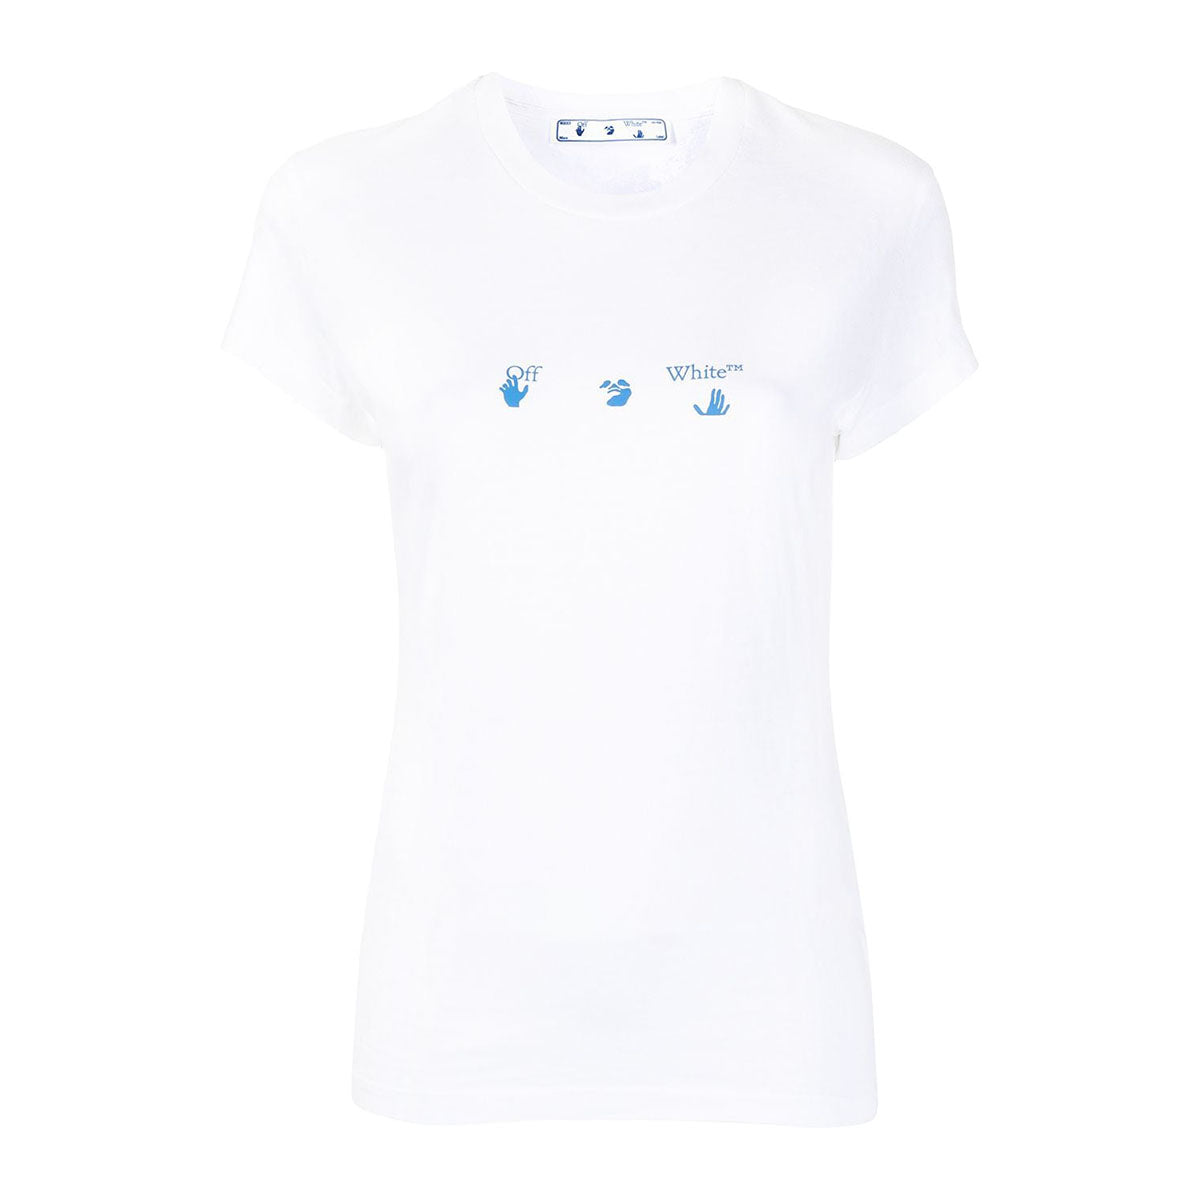 Swimming logo fitted tee white blue